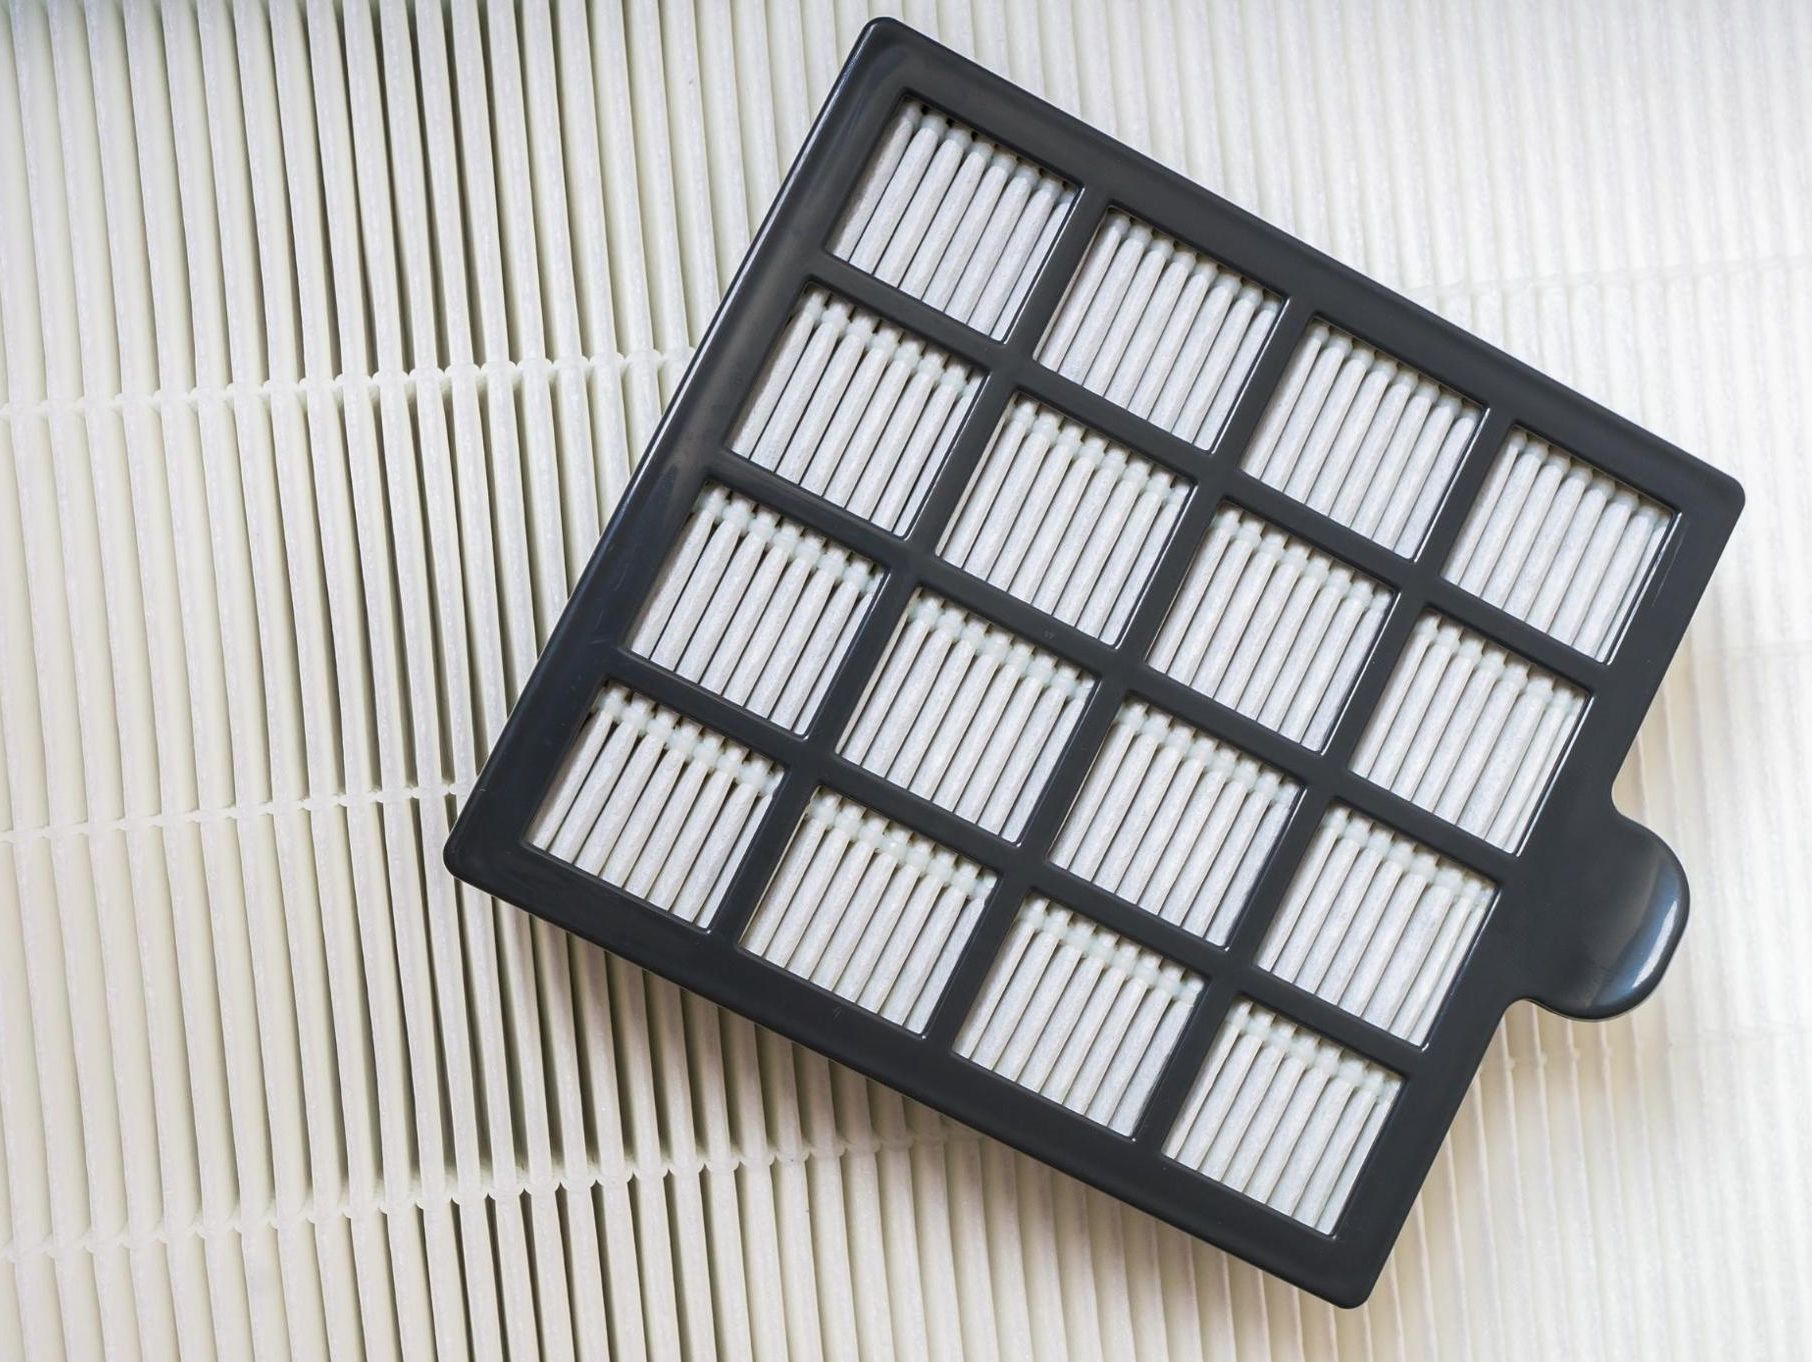 Two sizes of clean filters